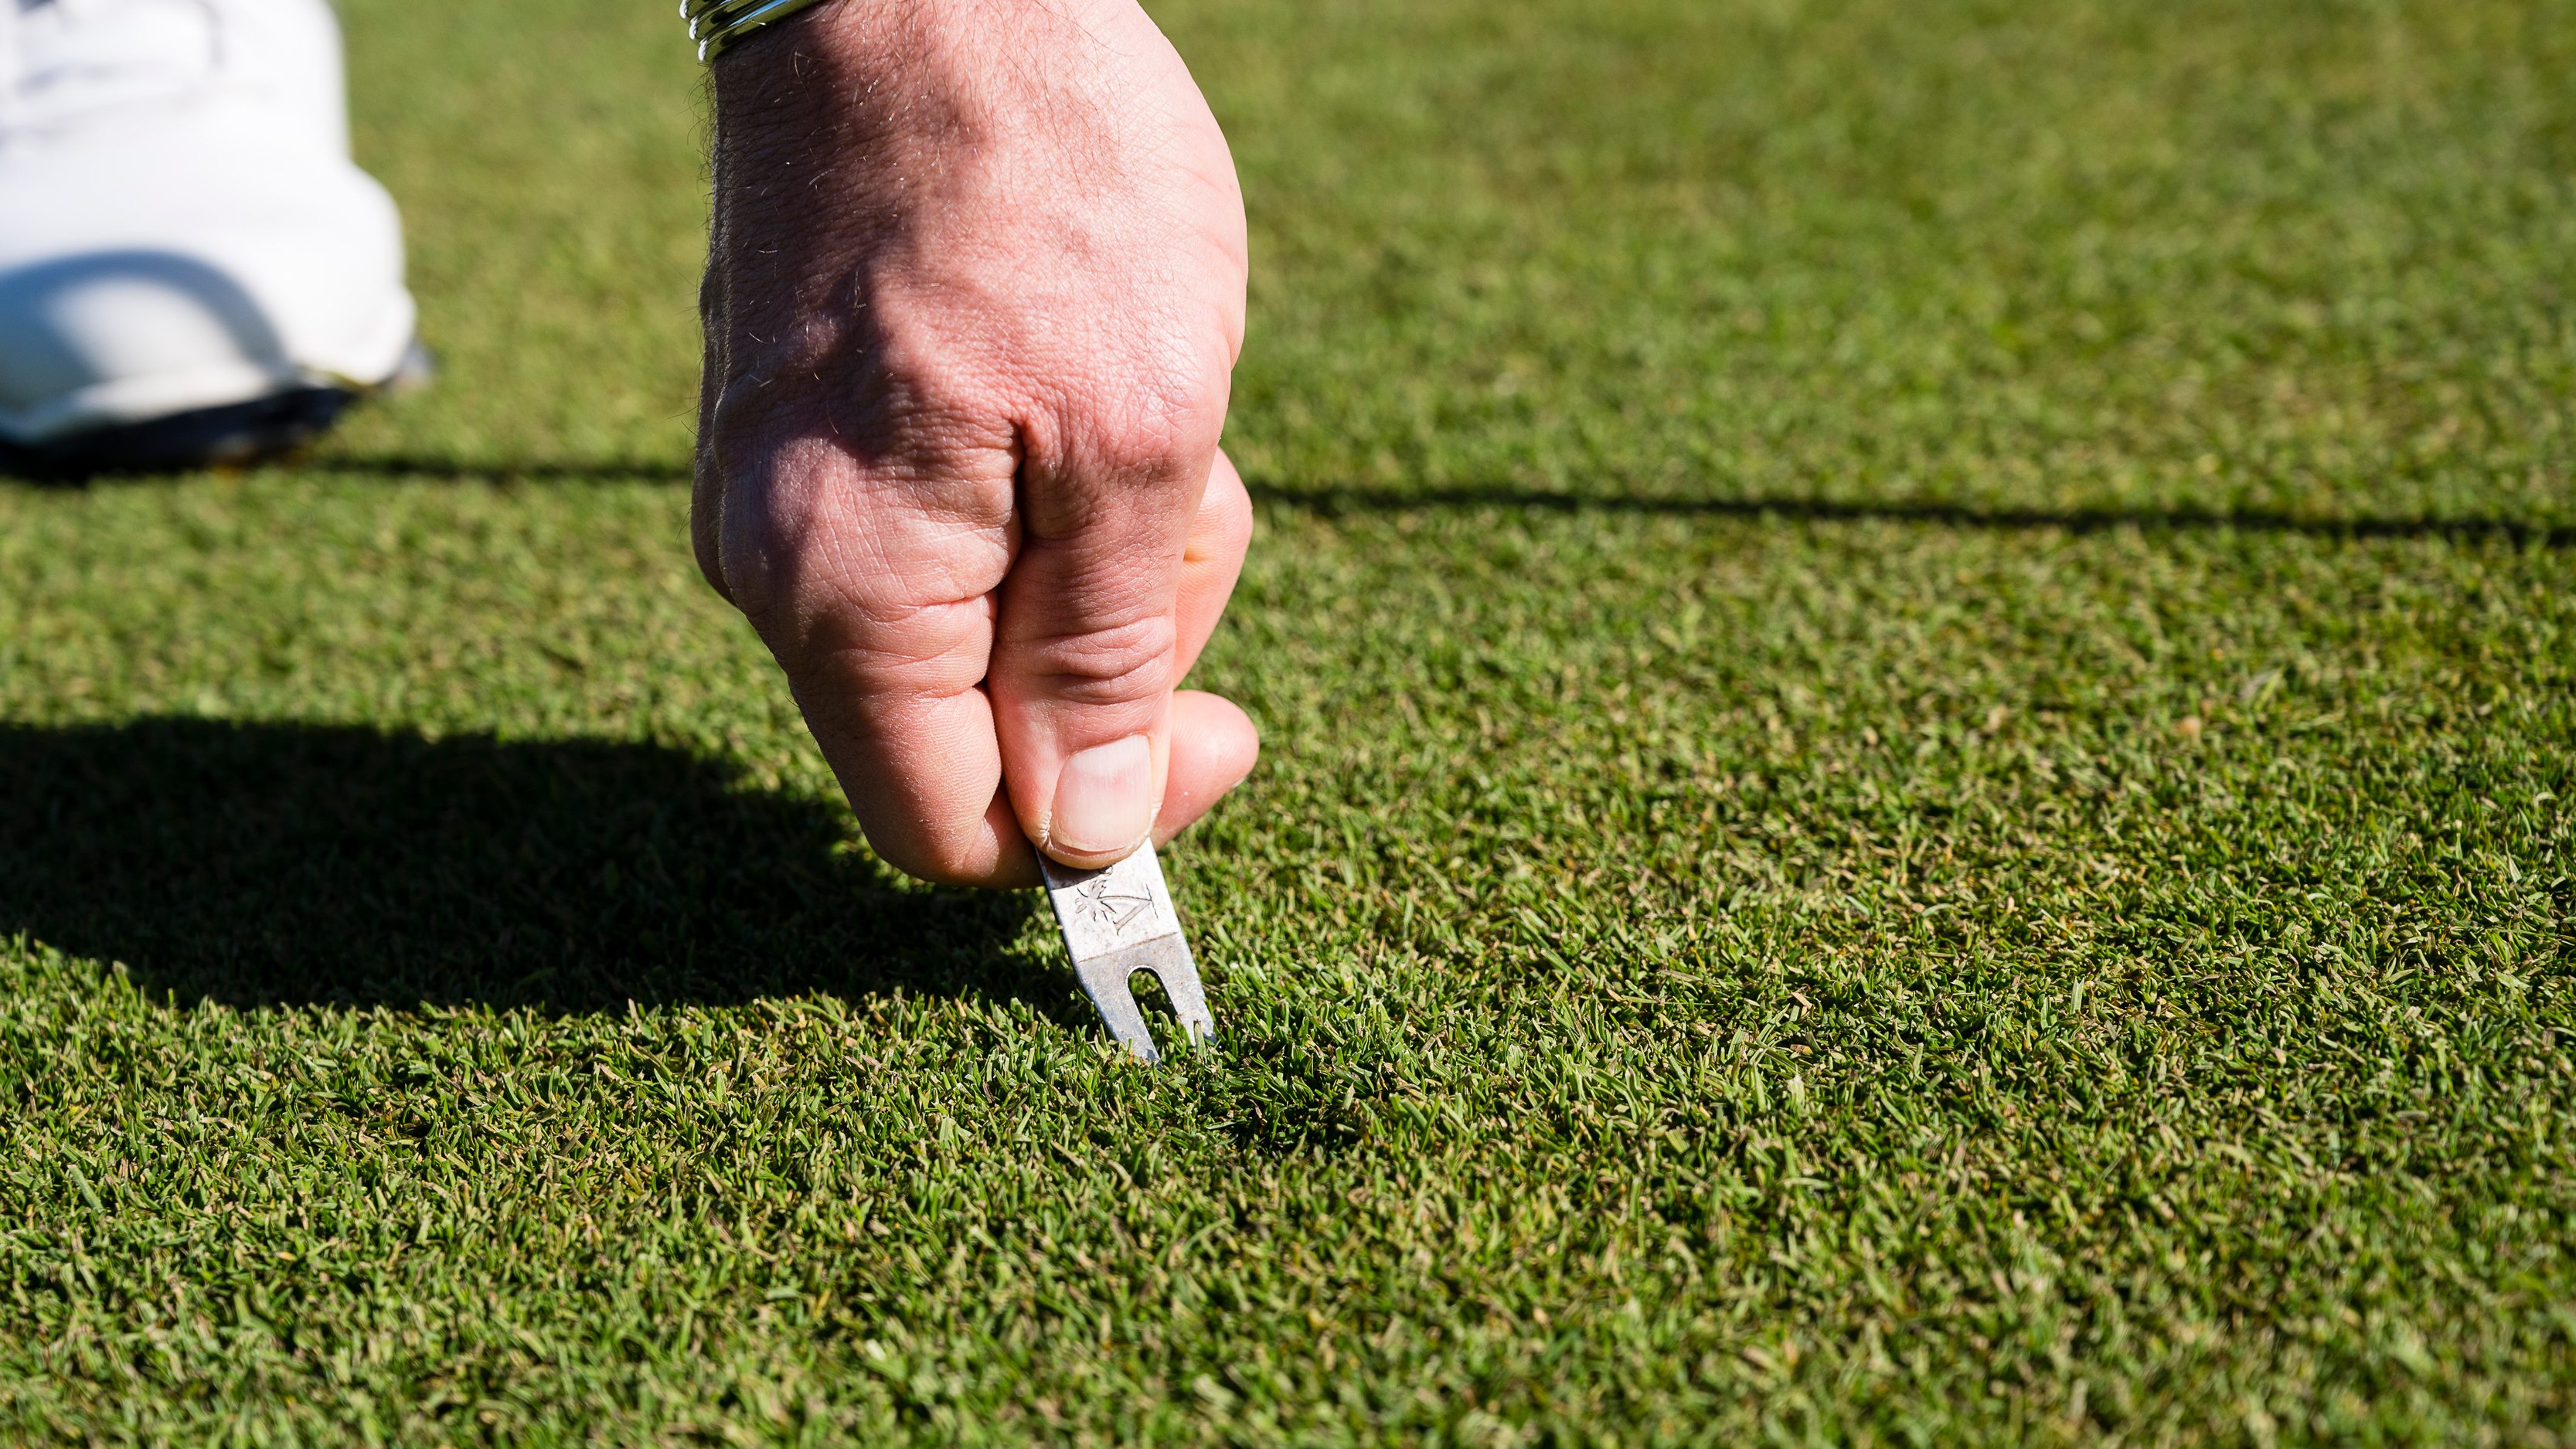 How To Repair A Pitch Mark Correctly - Golf Monthly | Golf Monthly